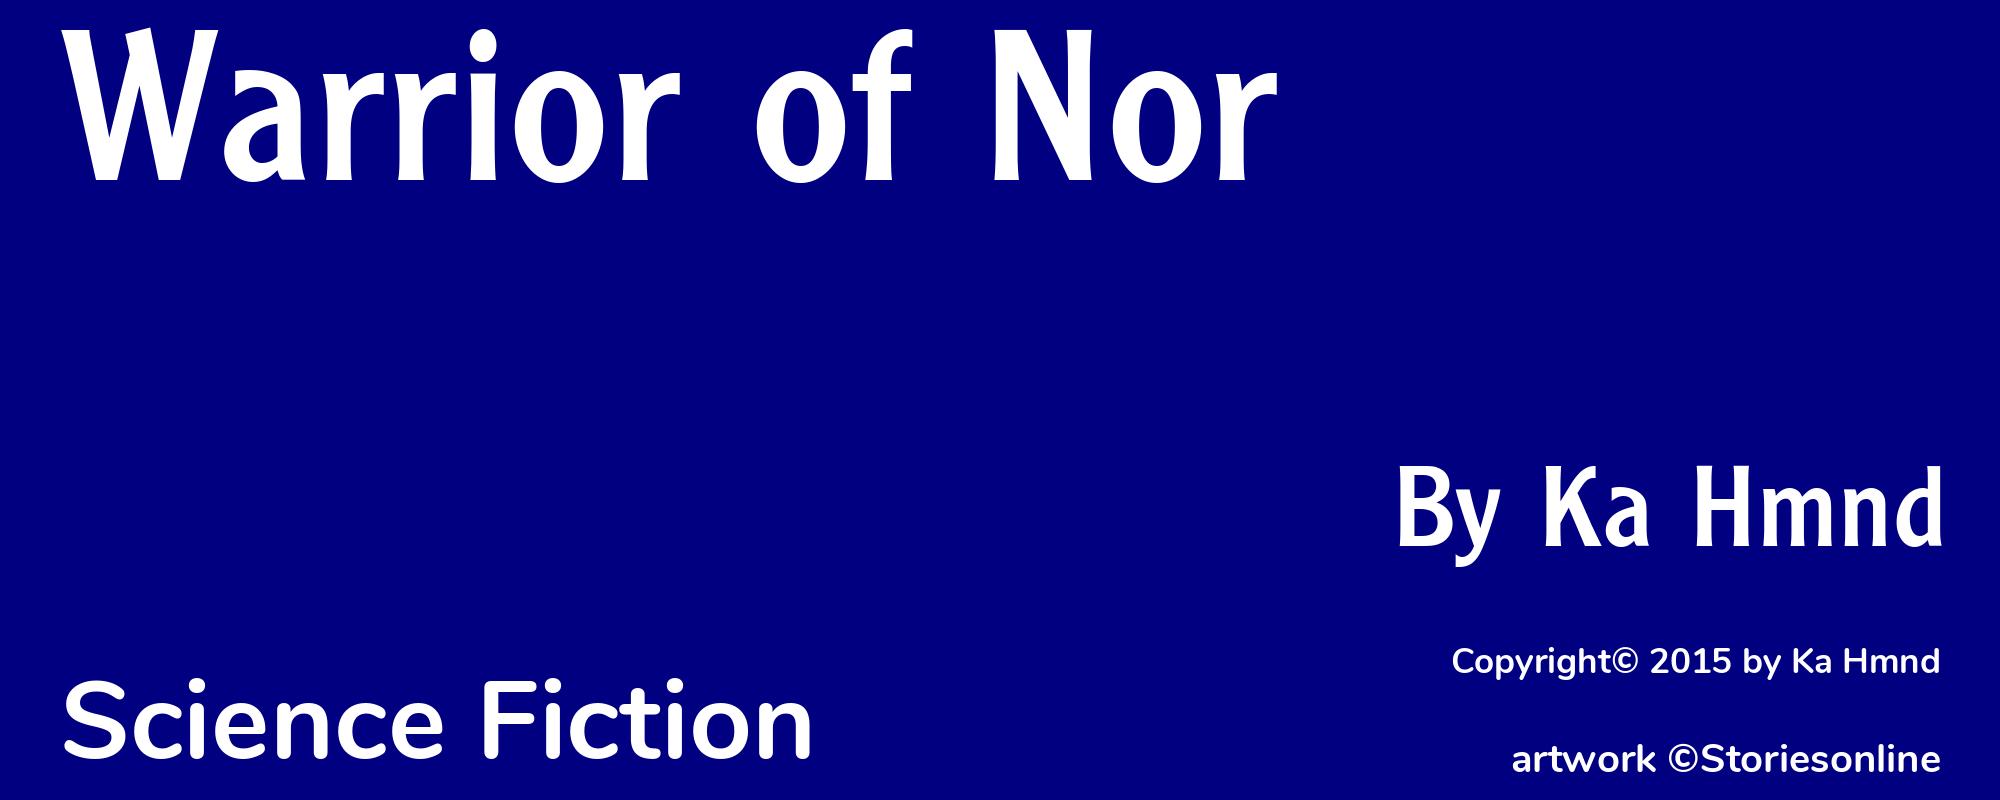 Warrior of Nor - Cover